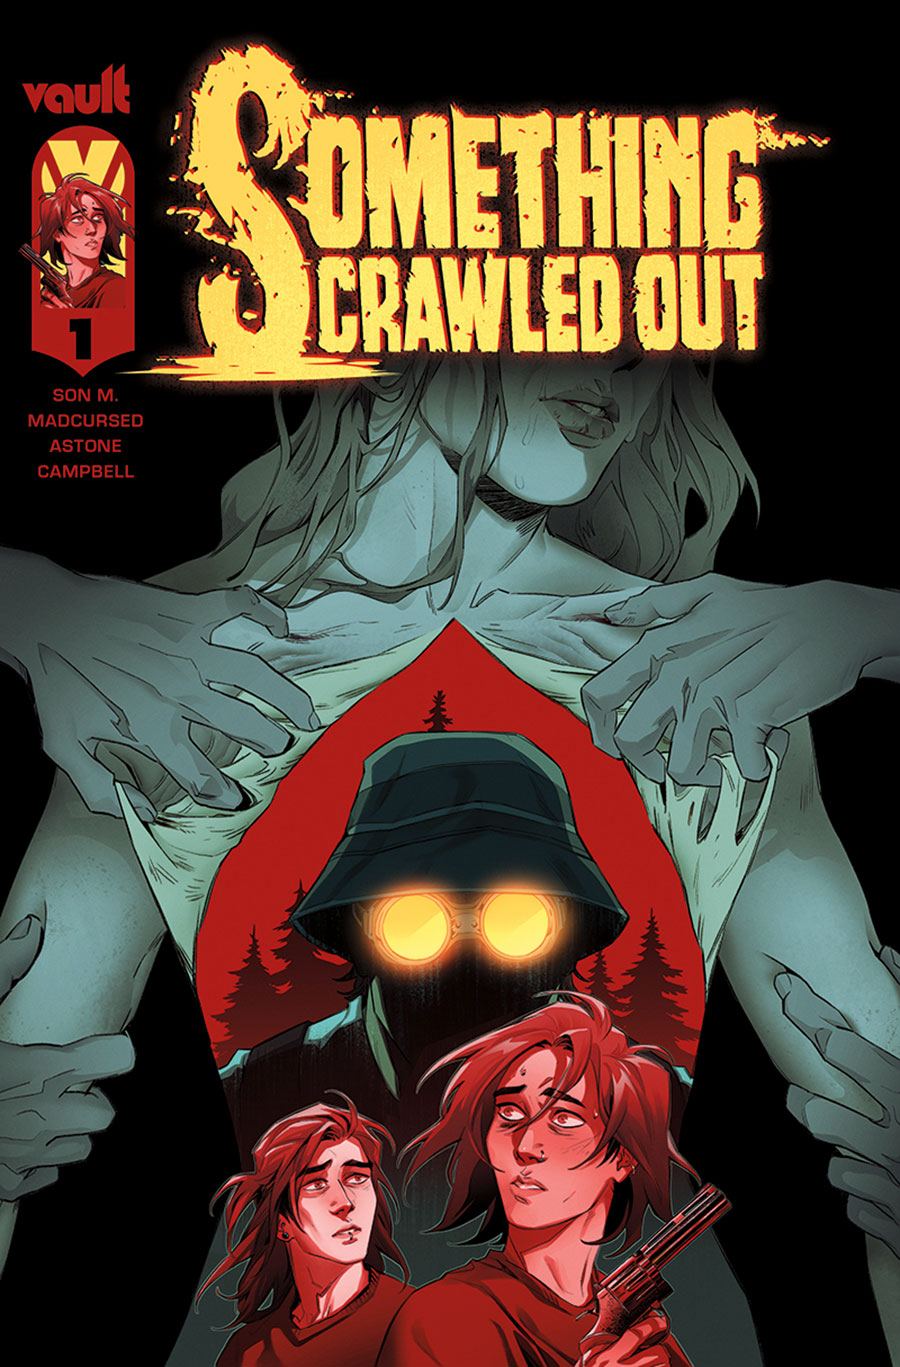 Something Crawled Out #1 Cover A Regular Cas Madcursed Peirano Cover - FREE - Limit 1 Per Customer